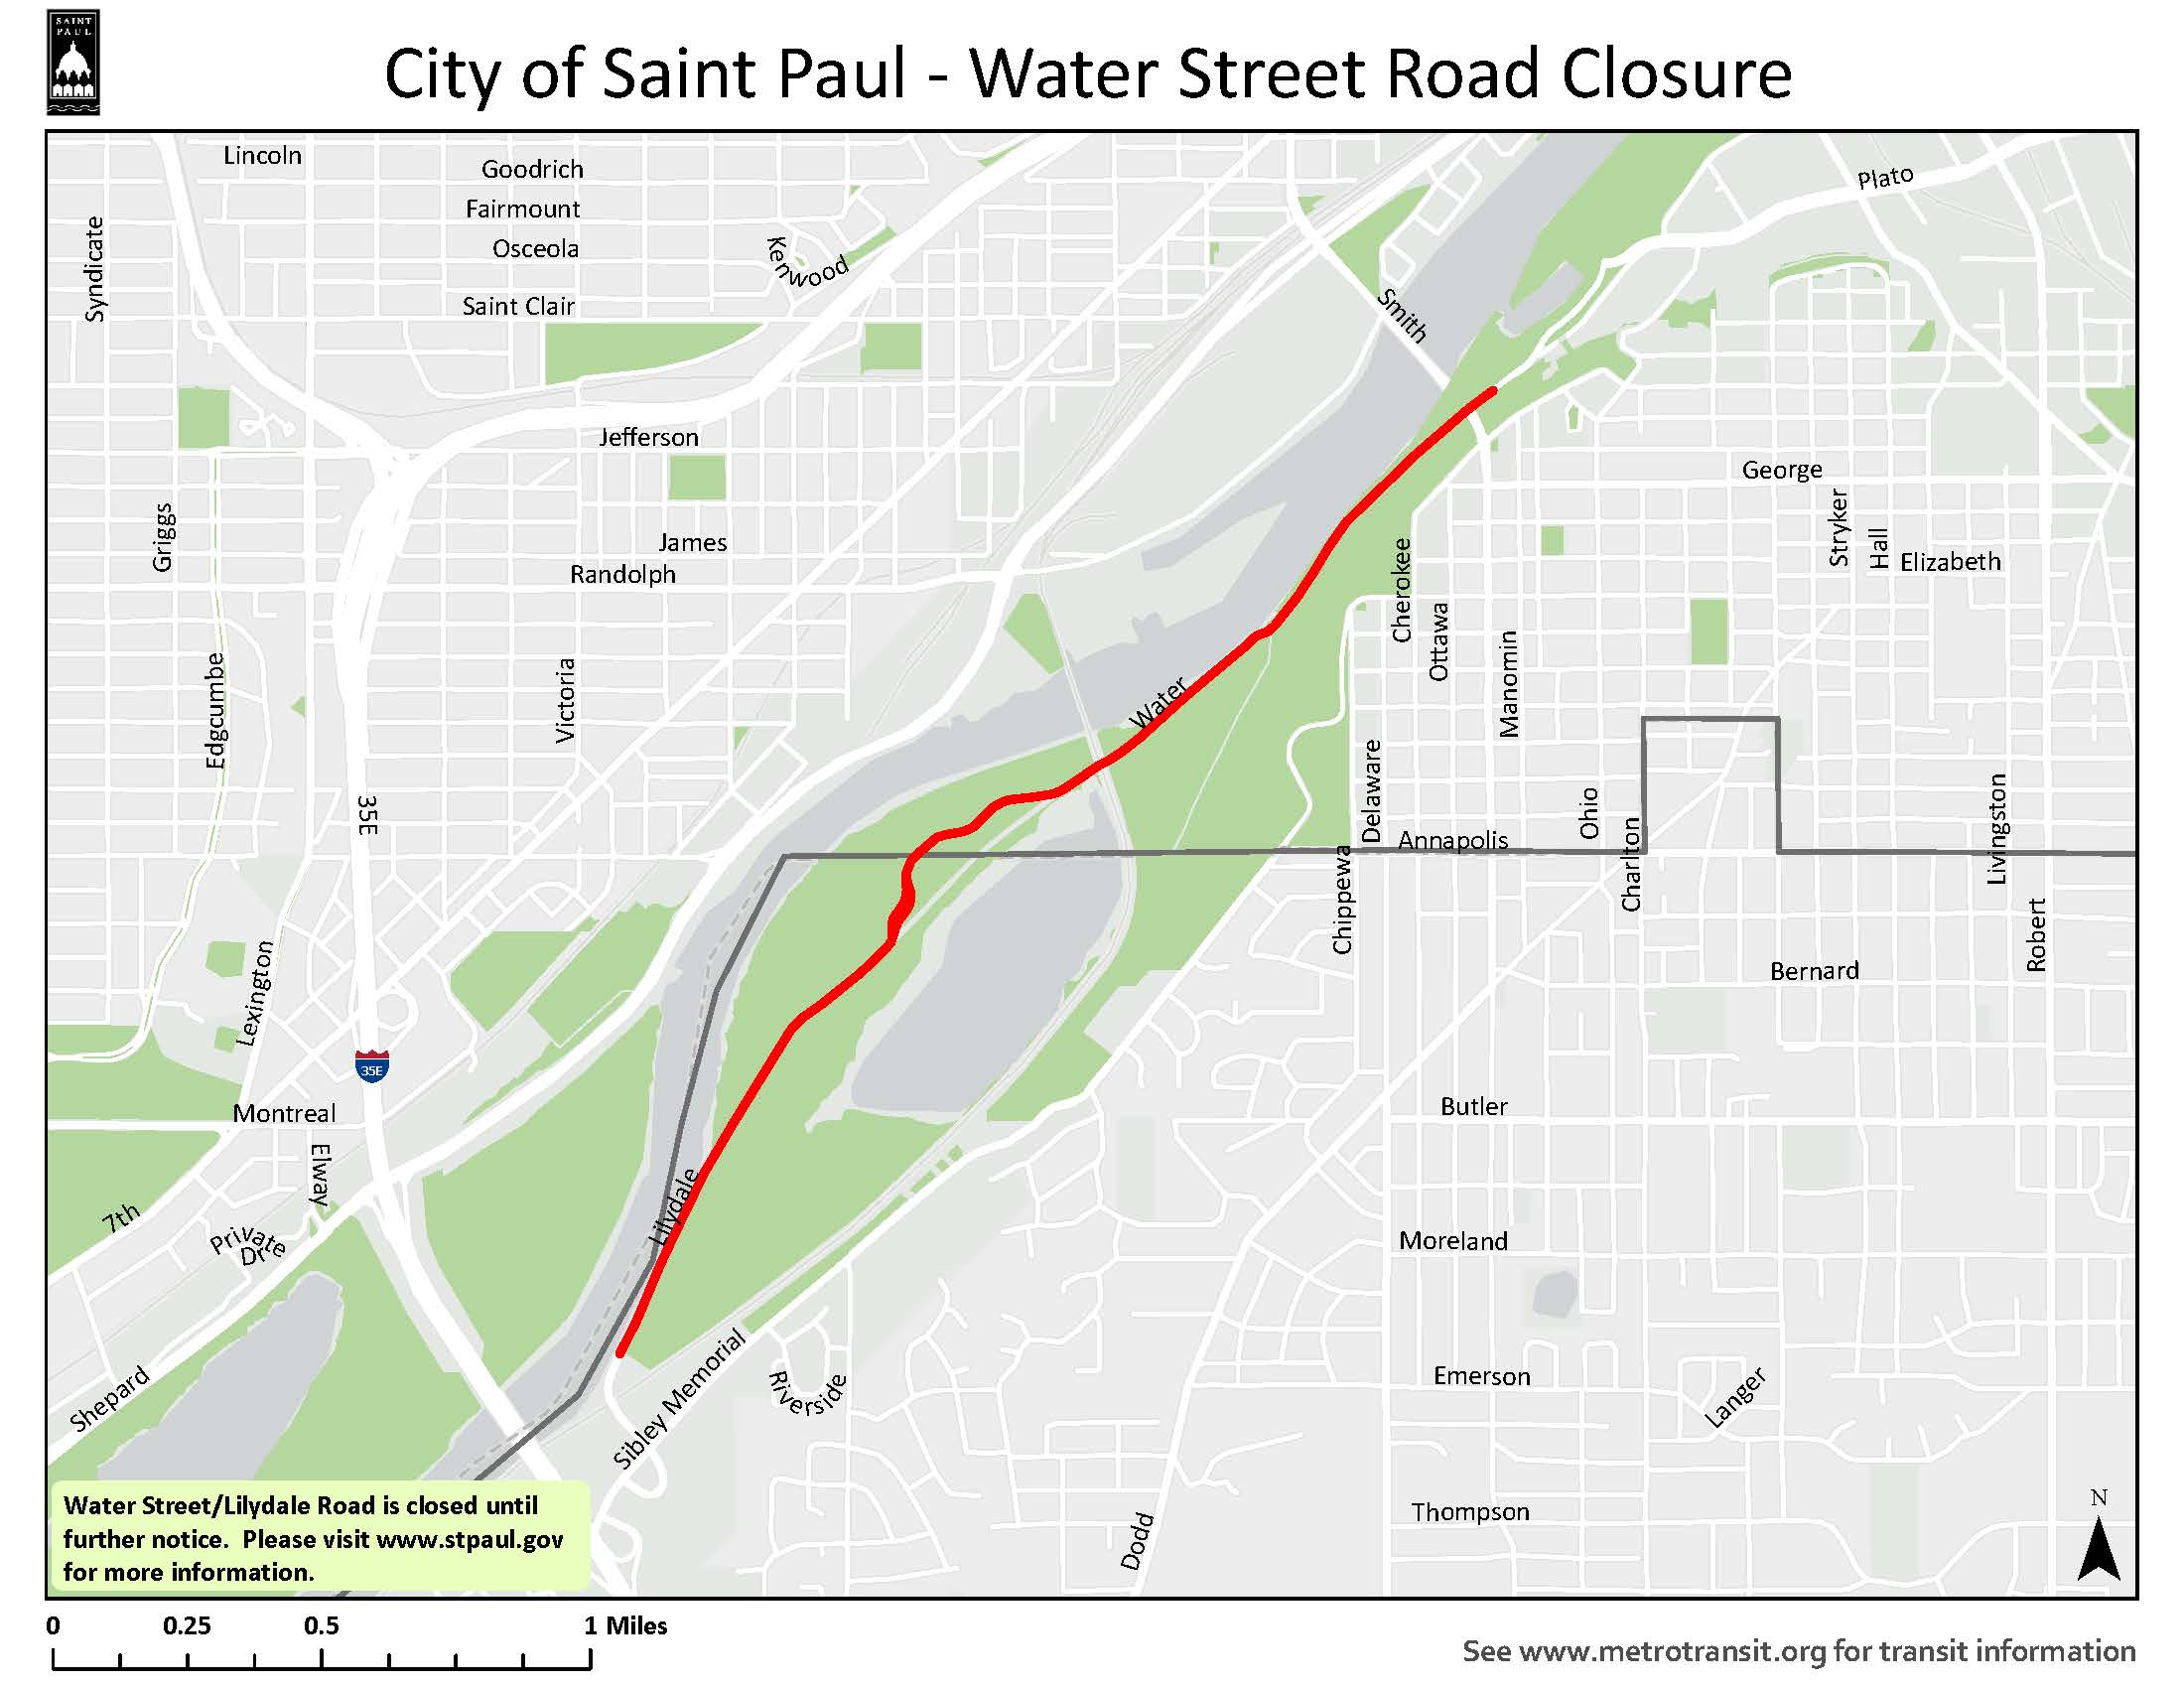 Graphic map showing the street closure of Lilydale Road/Water Street from Hwy 13 to Plato